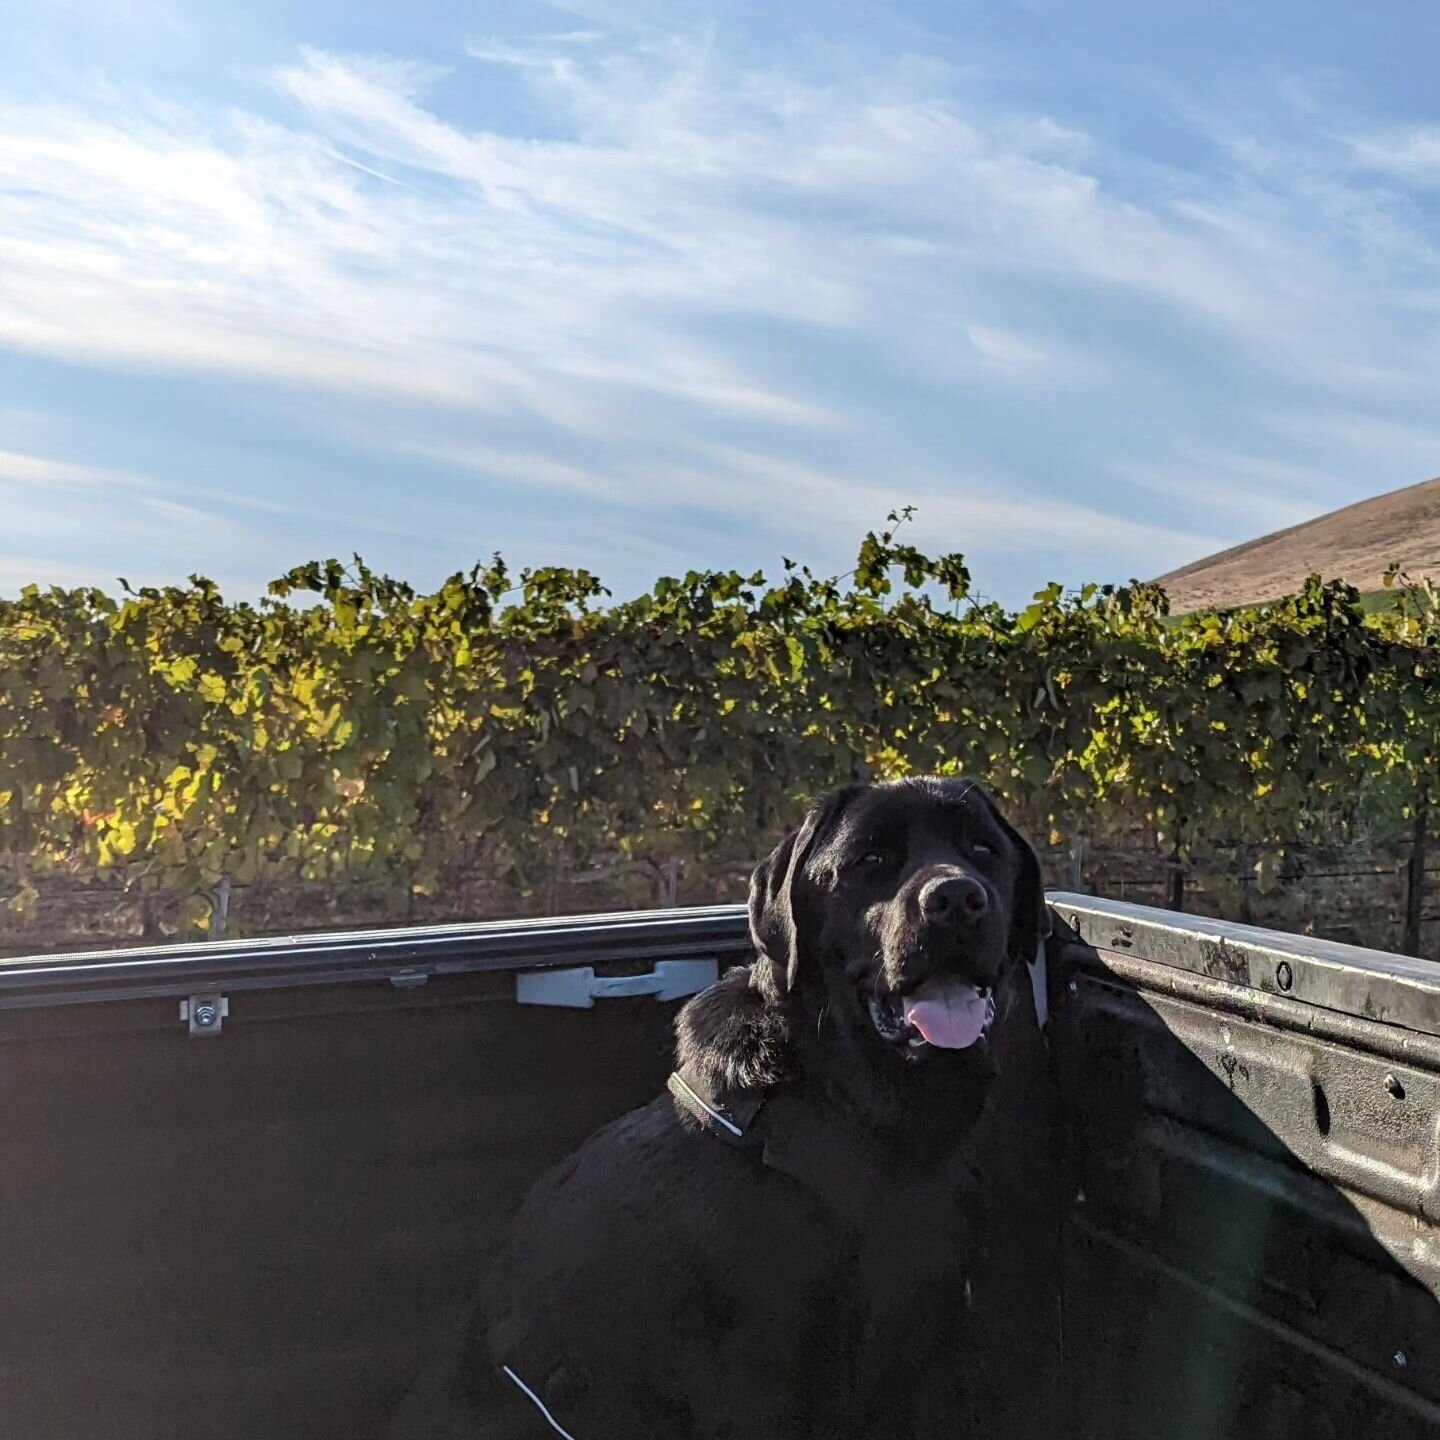 🍇 Griffey: A Vineyard Virtuoso&nbsp;🐶🚜

From sunrise strolls among the vines to exploring the vineyards on truck-bed rides and paw-fect patio greetings, this English Labrador knows Red Mountain's heart and soul 

Almost 4 years of spreading smiles